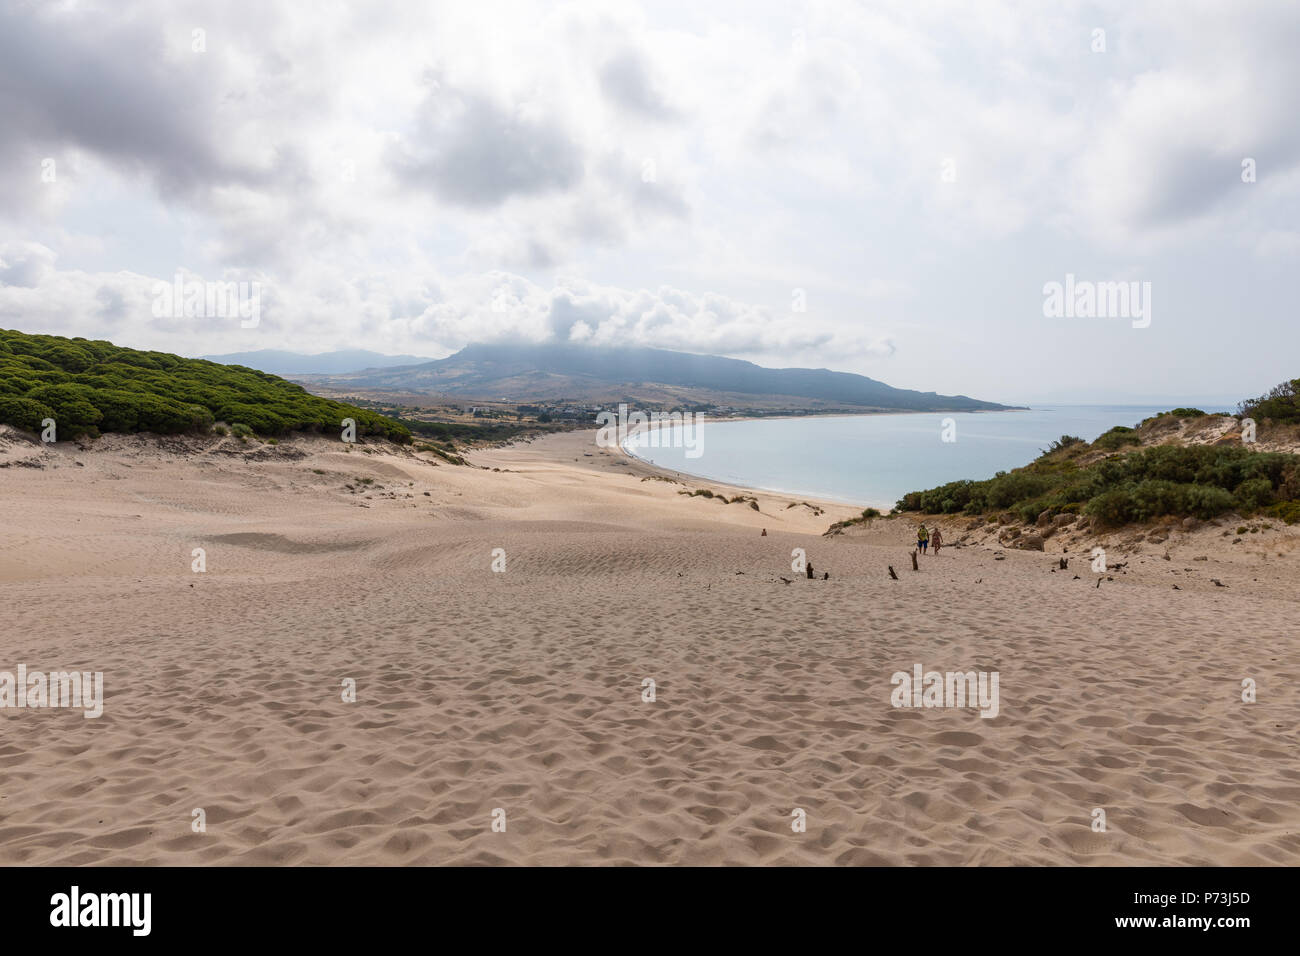 Bolonia sand dune and Beach. June, 2018. Andalusia, Spain Stock Photo